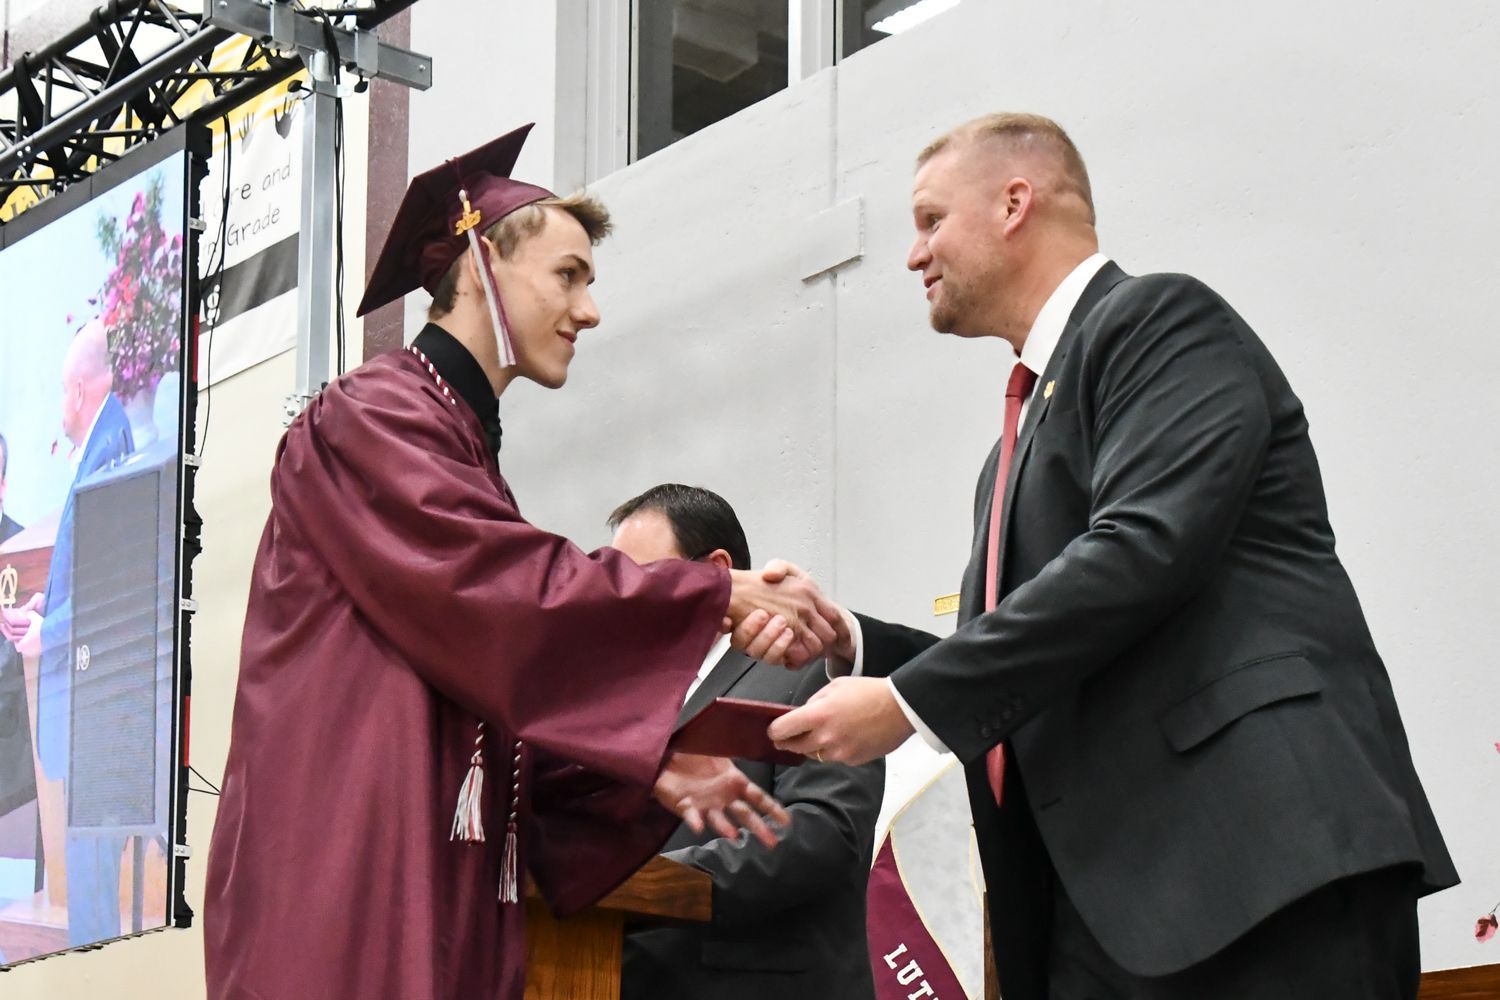 President Loberger shaking the hand of a male student, and handing him a diploma